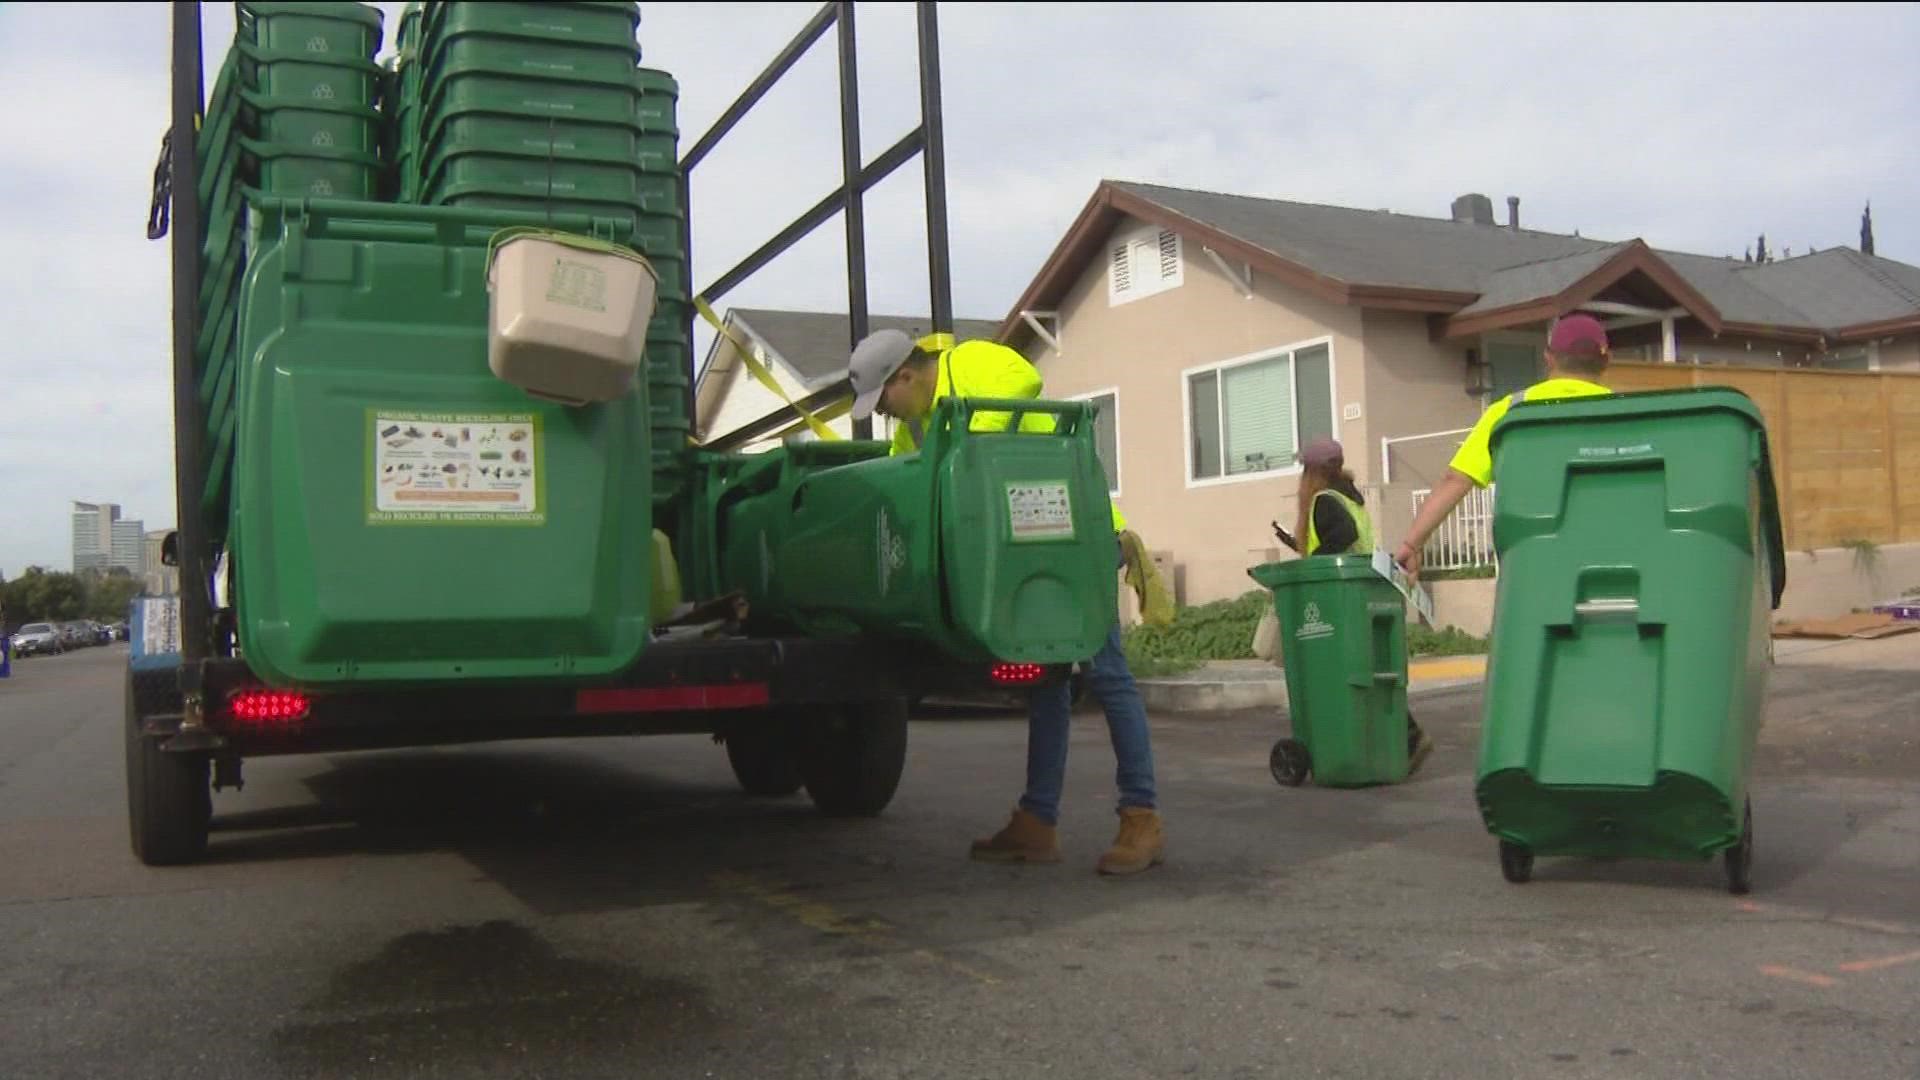 If you live in the City of San Diego, the green recycling bins are coming to a neighborhood near you.